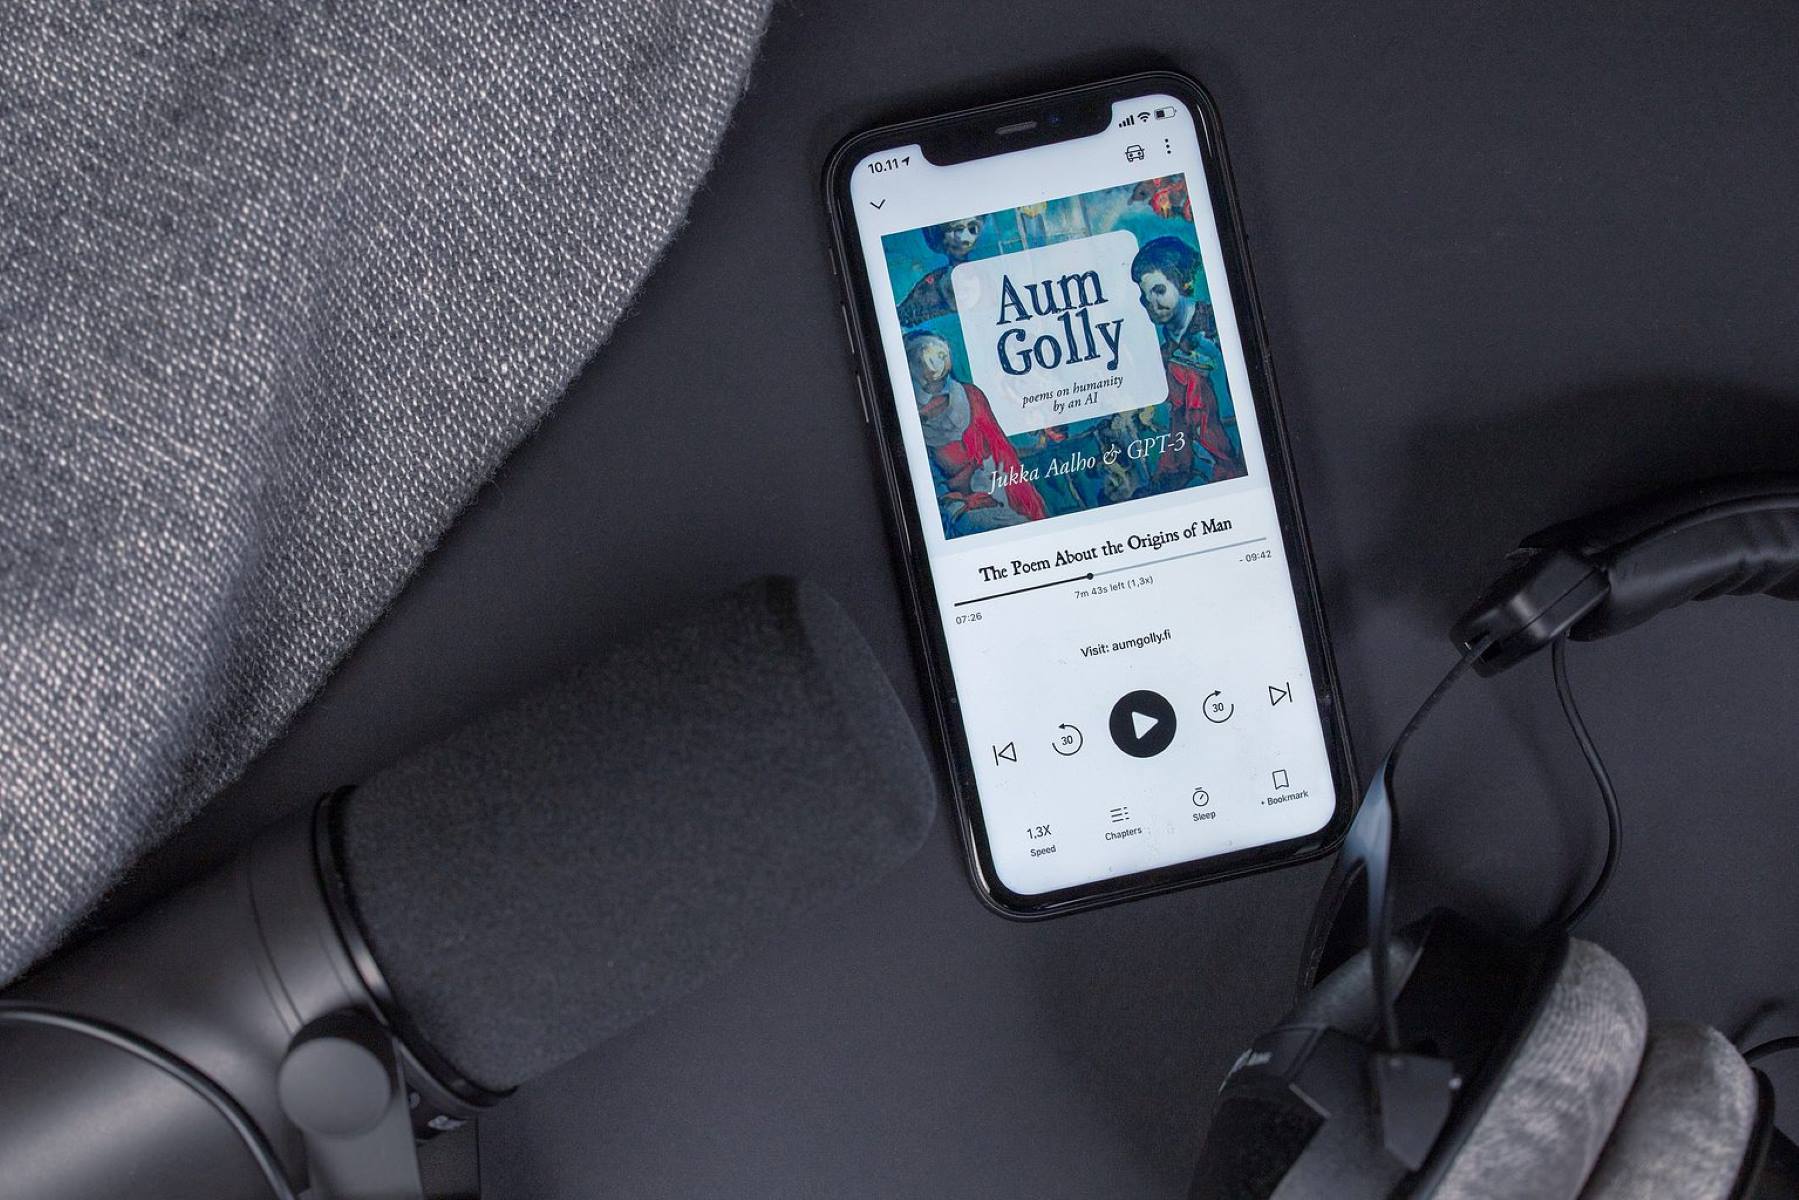 How To Remove An Audiobook From An IPhone